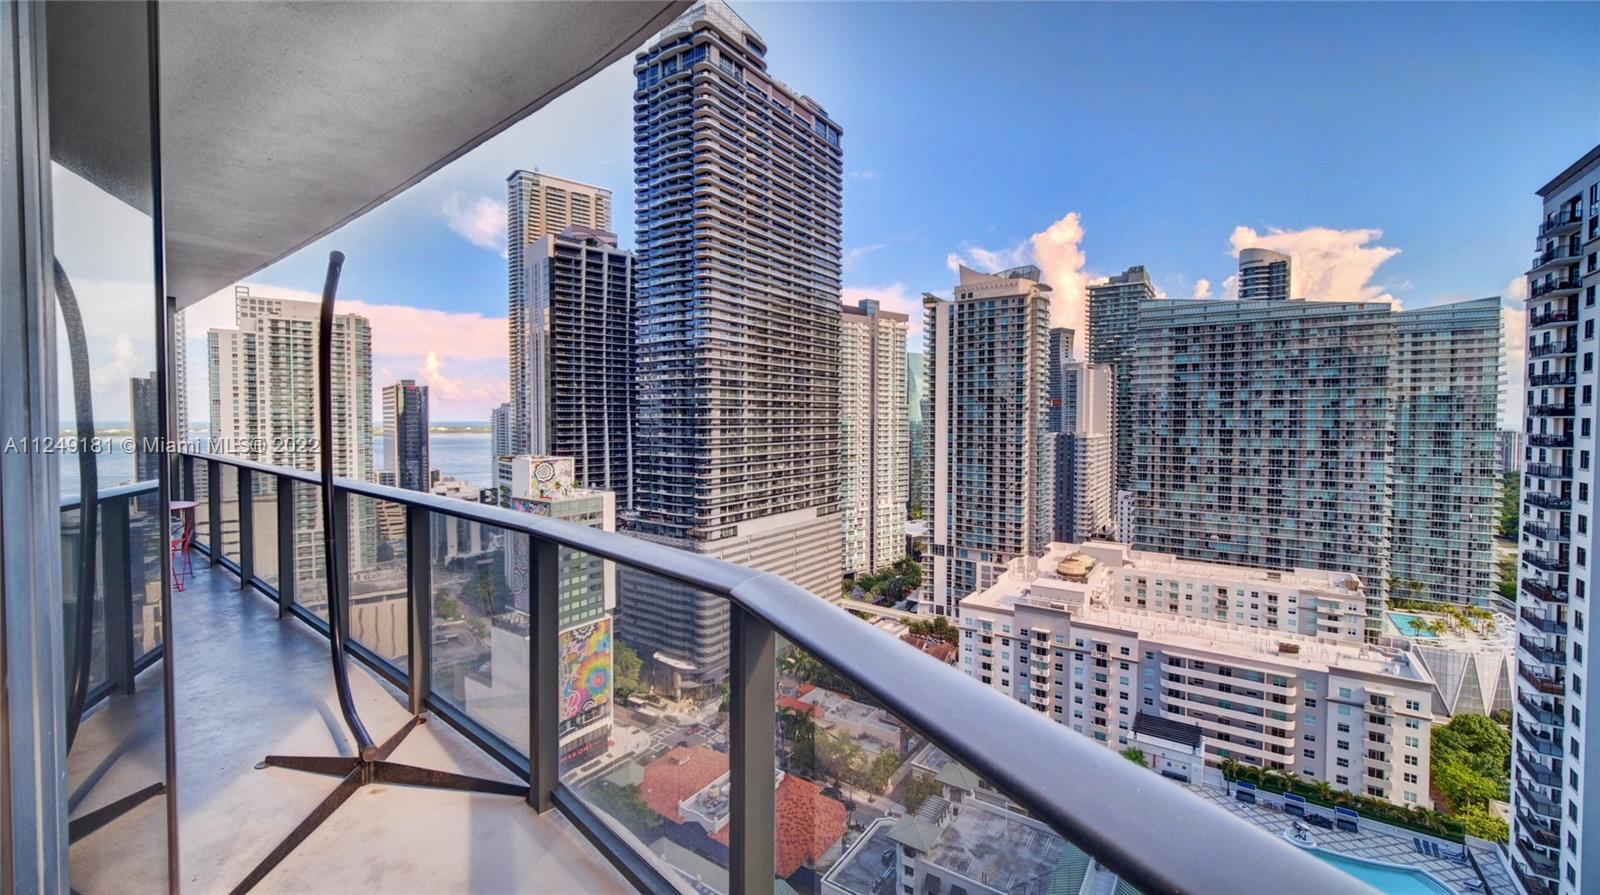 Brickell Heights West Tower image #24